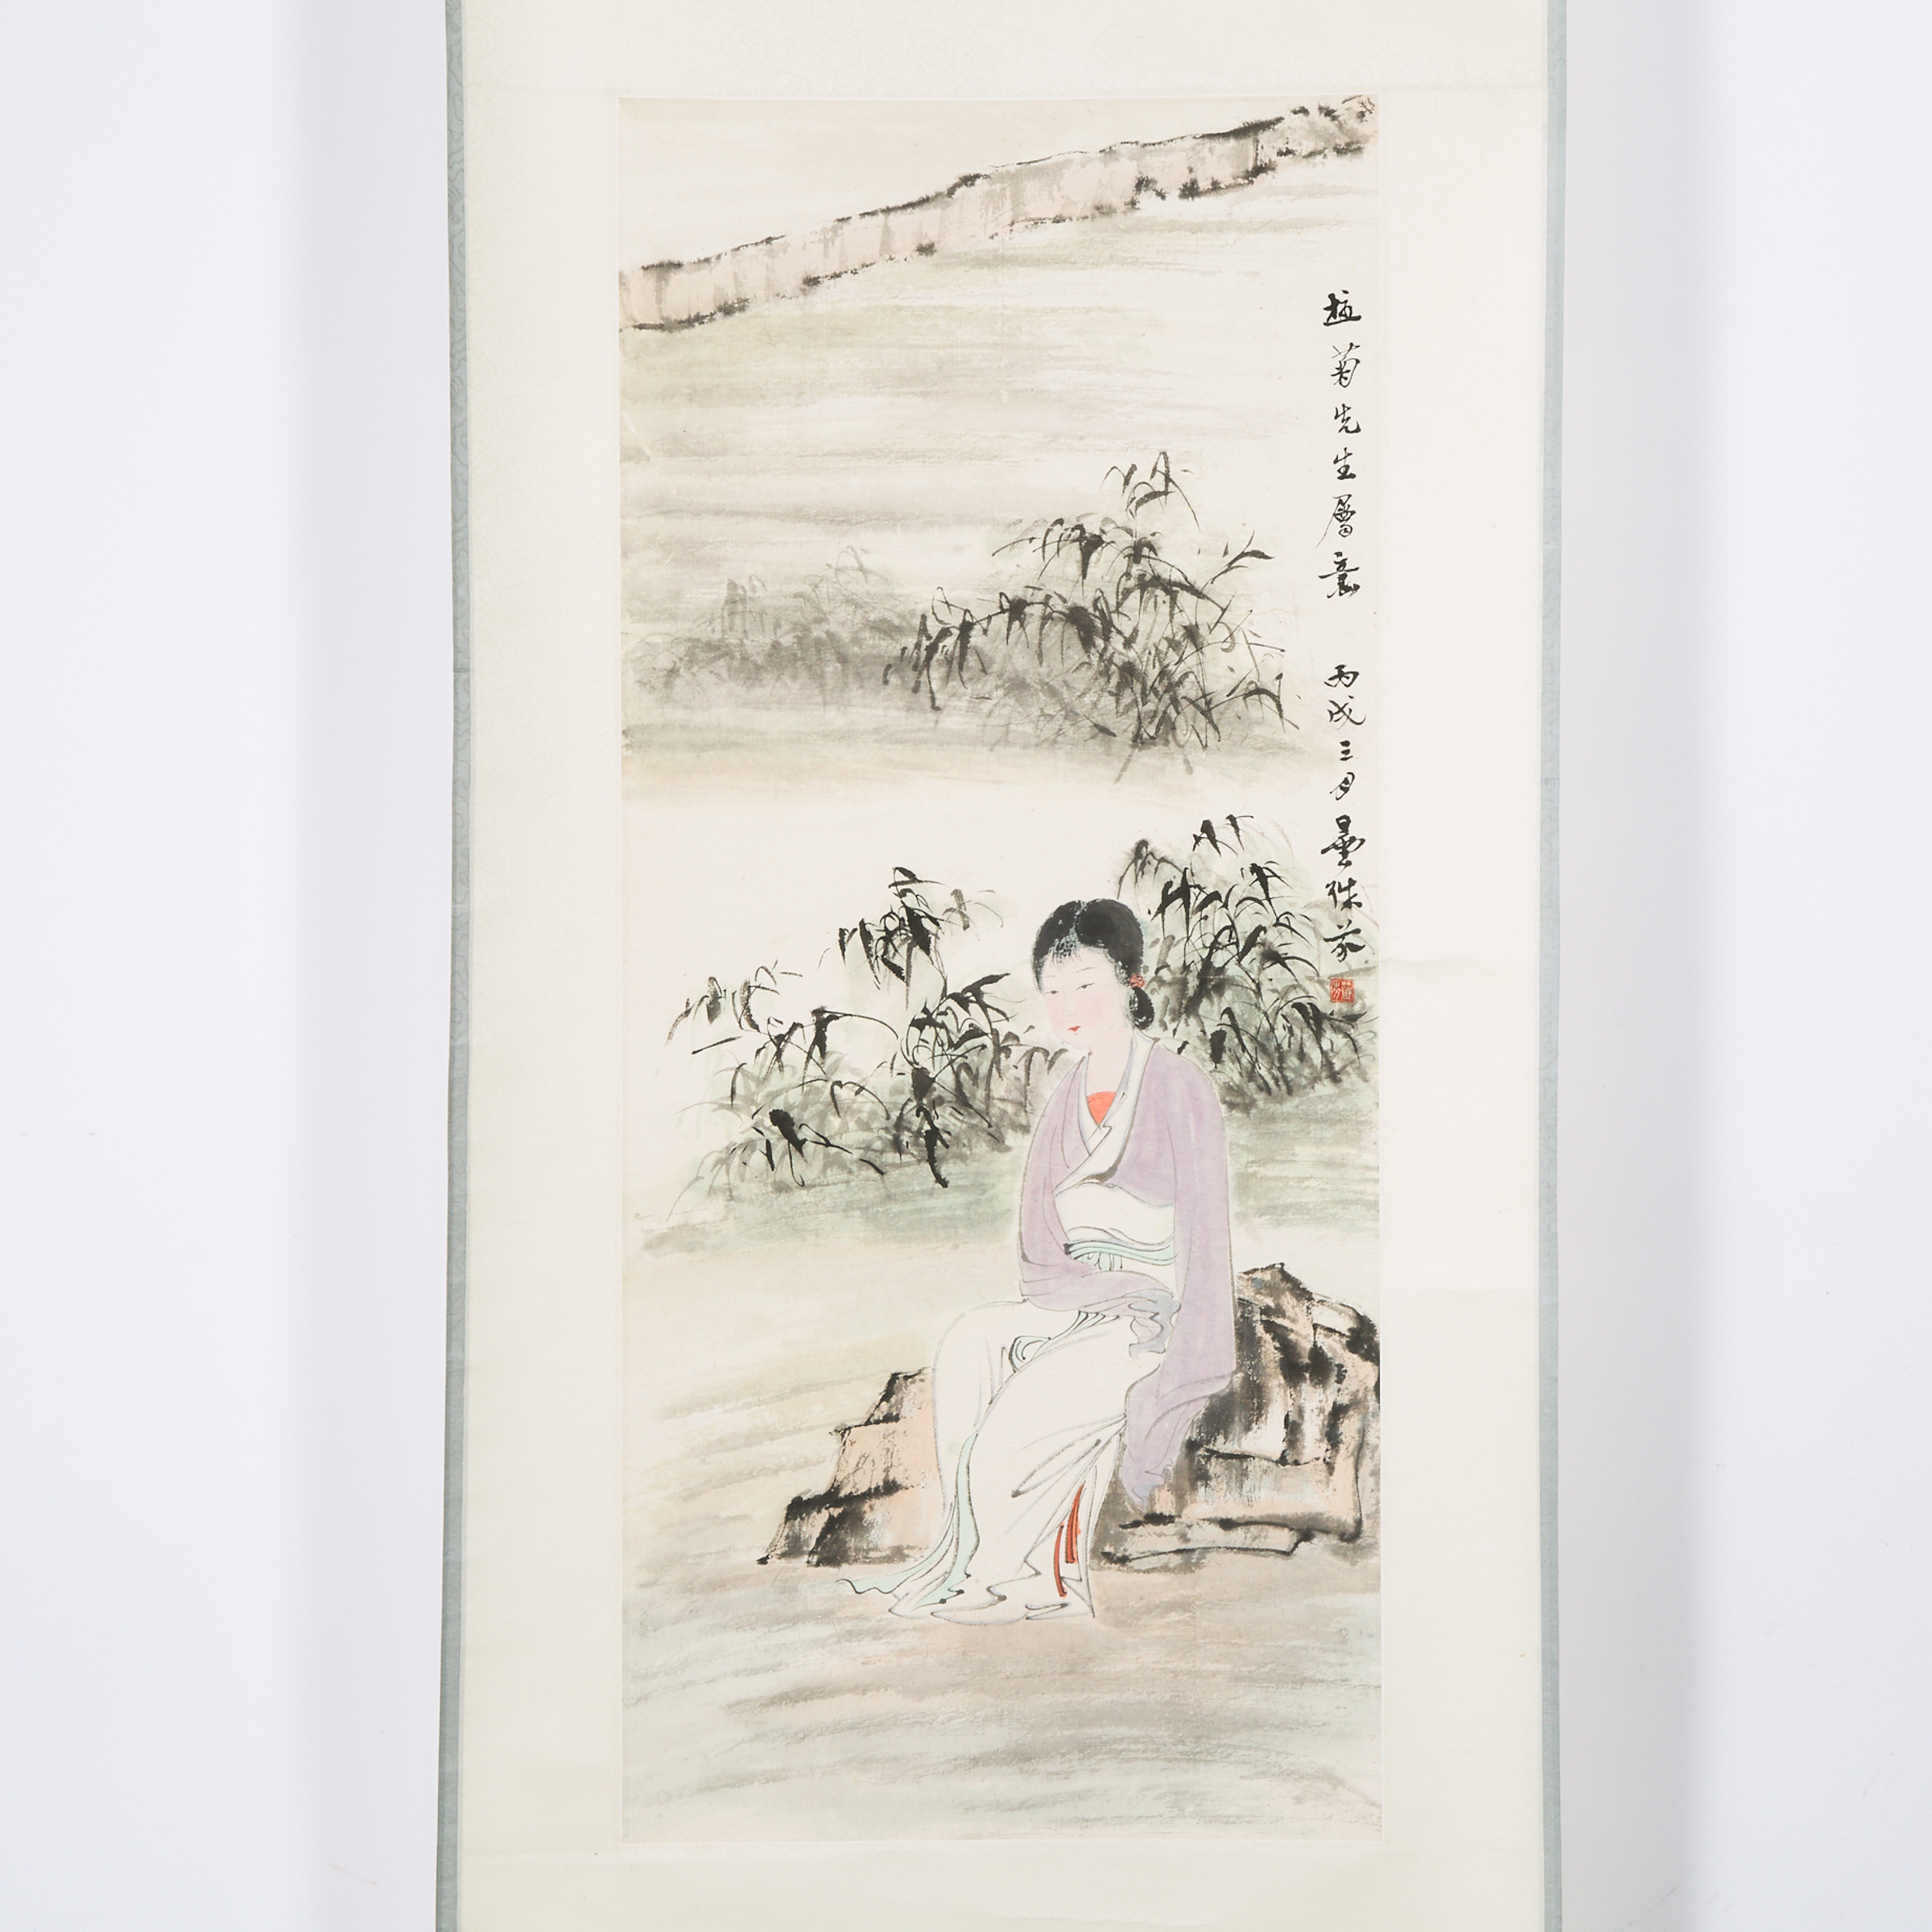 Attributed to Deng Fen (1894-1964), Lady and Bamboo